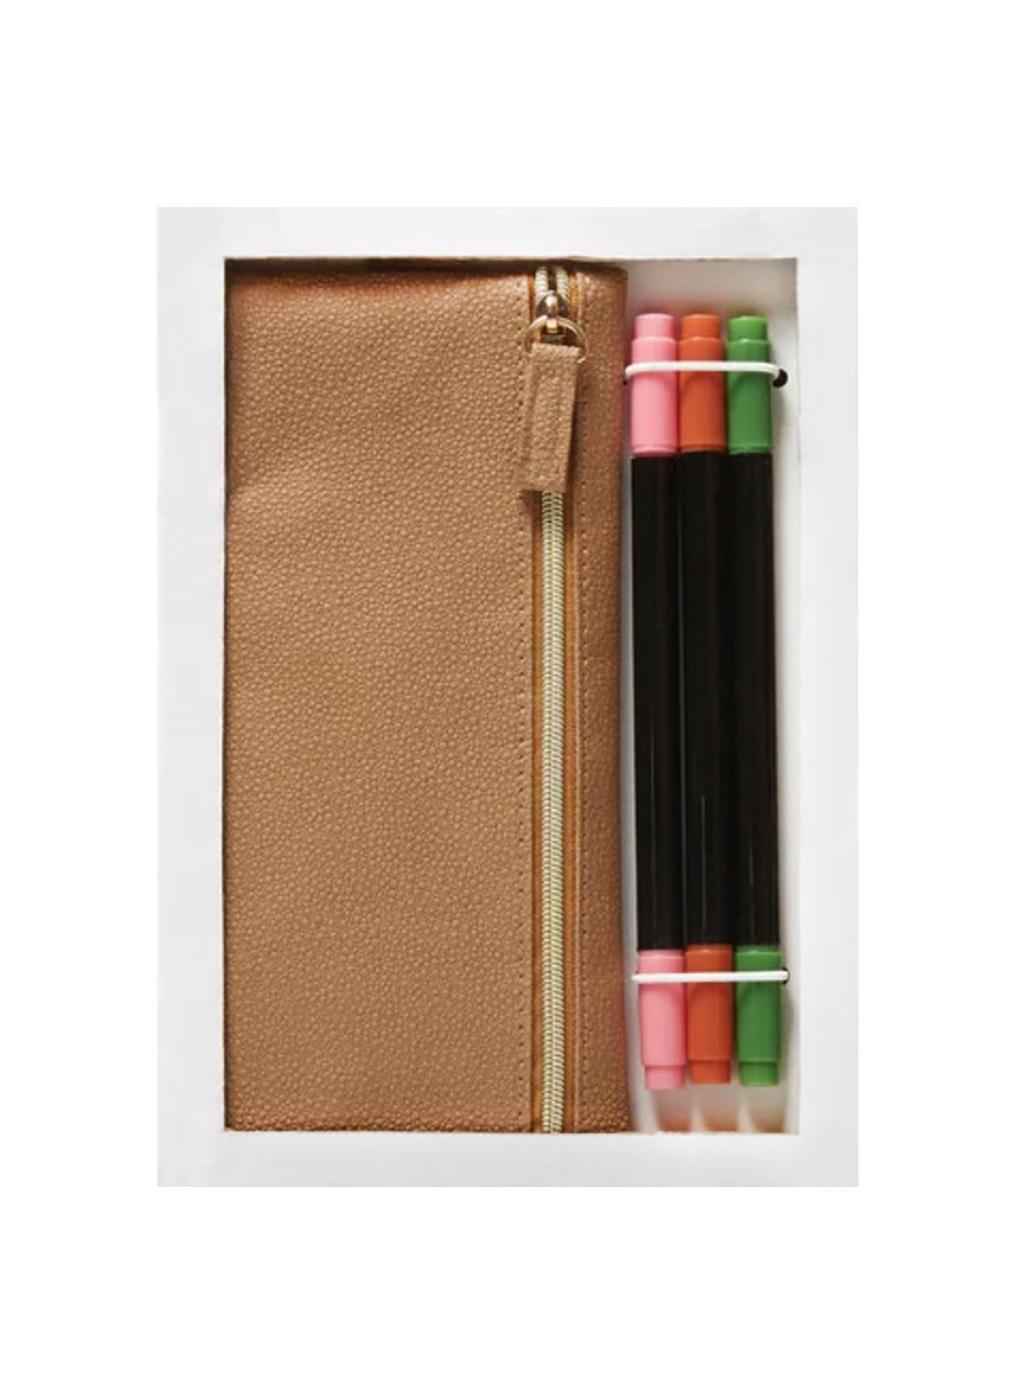 C.R. Gibson Leatherette Pencil Pouch & Marker Set; image 1 of 2